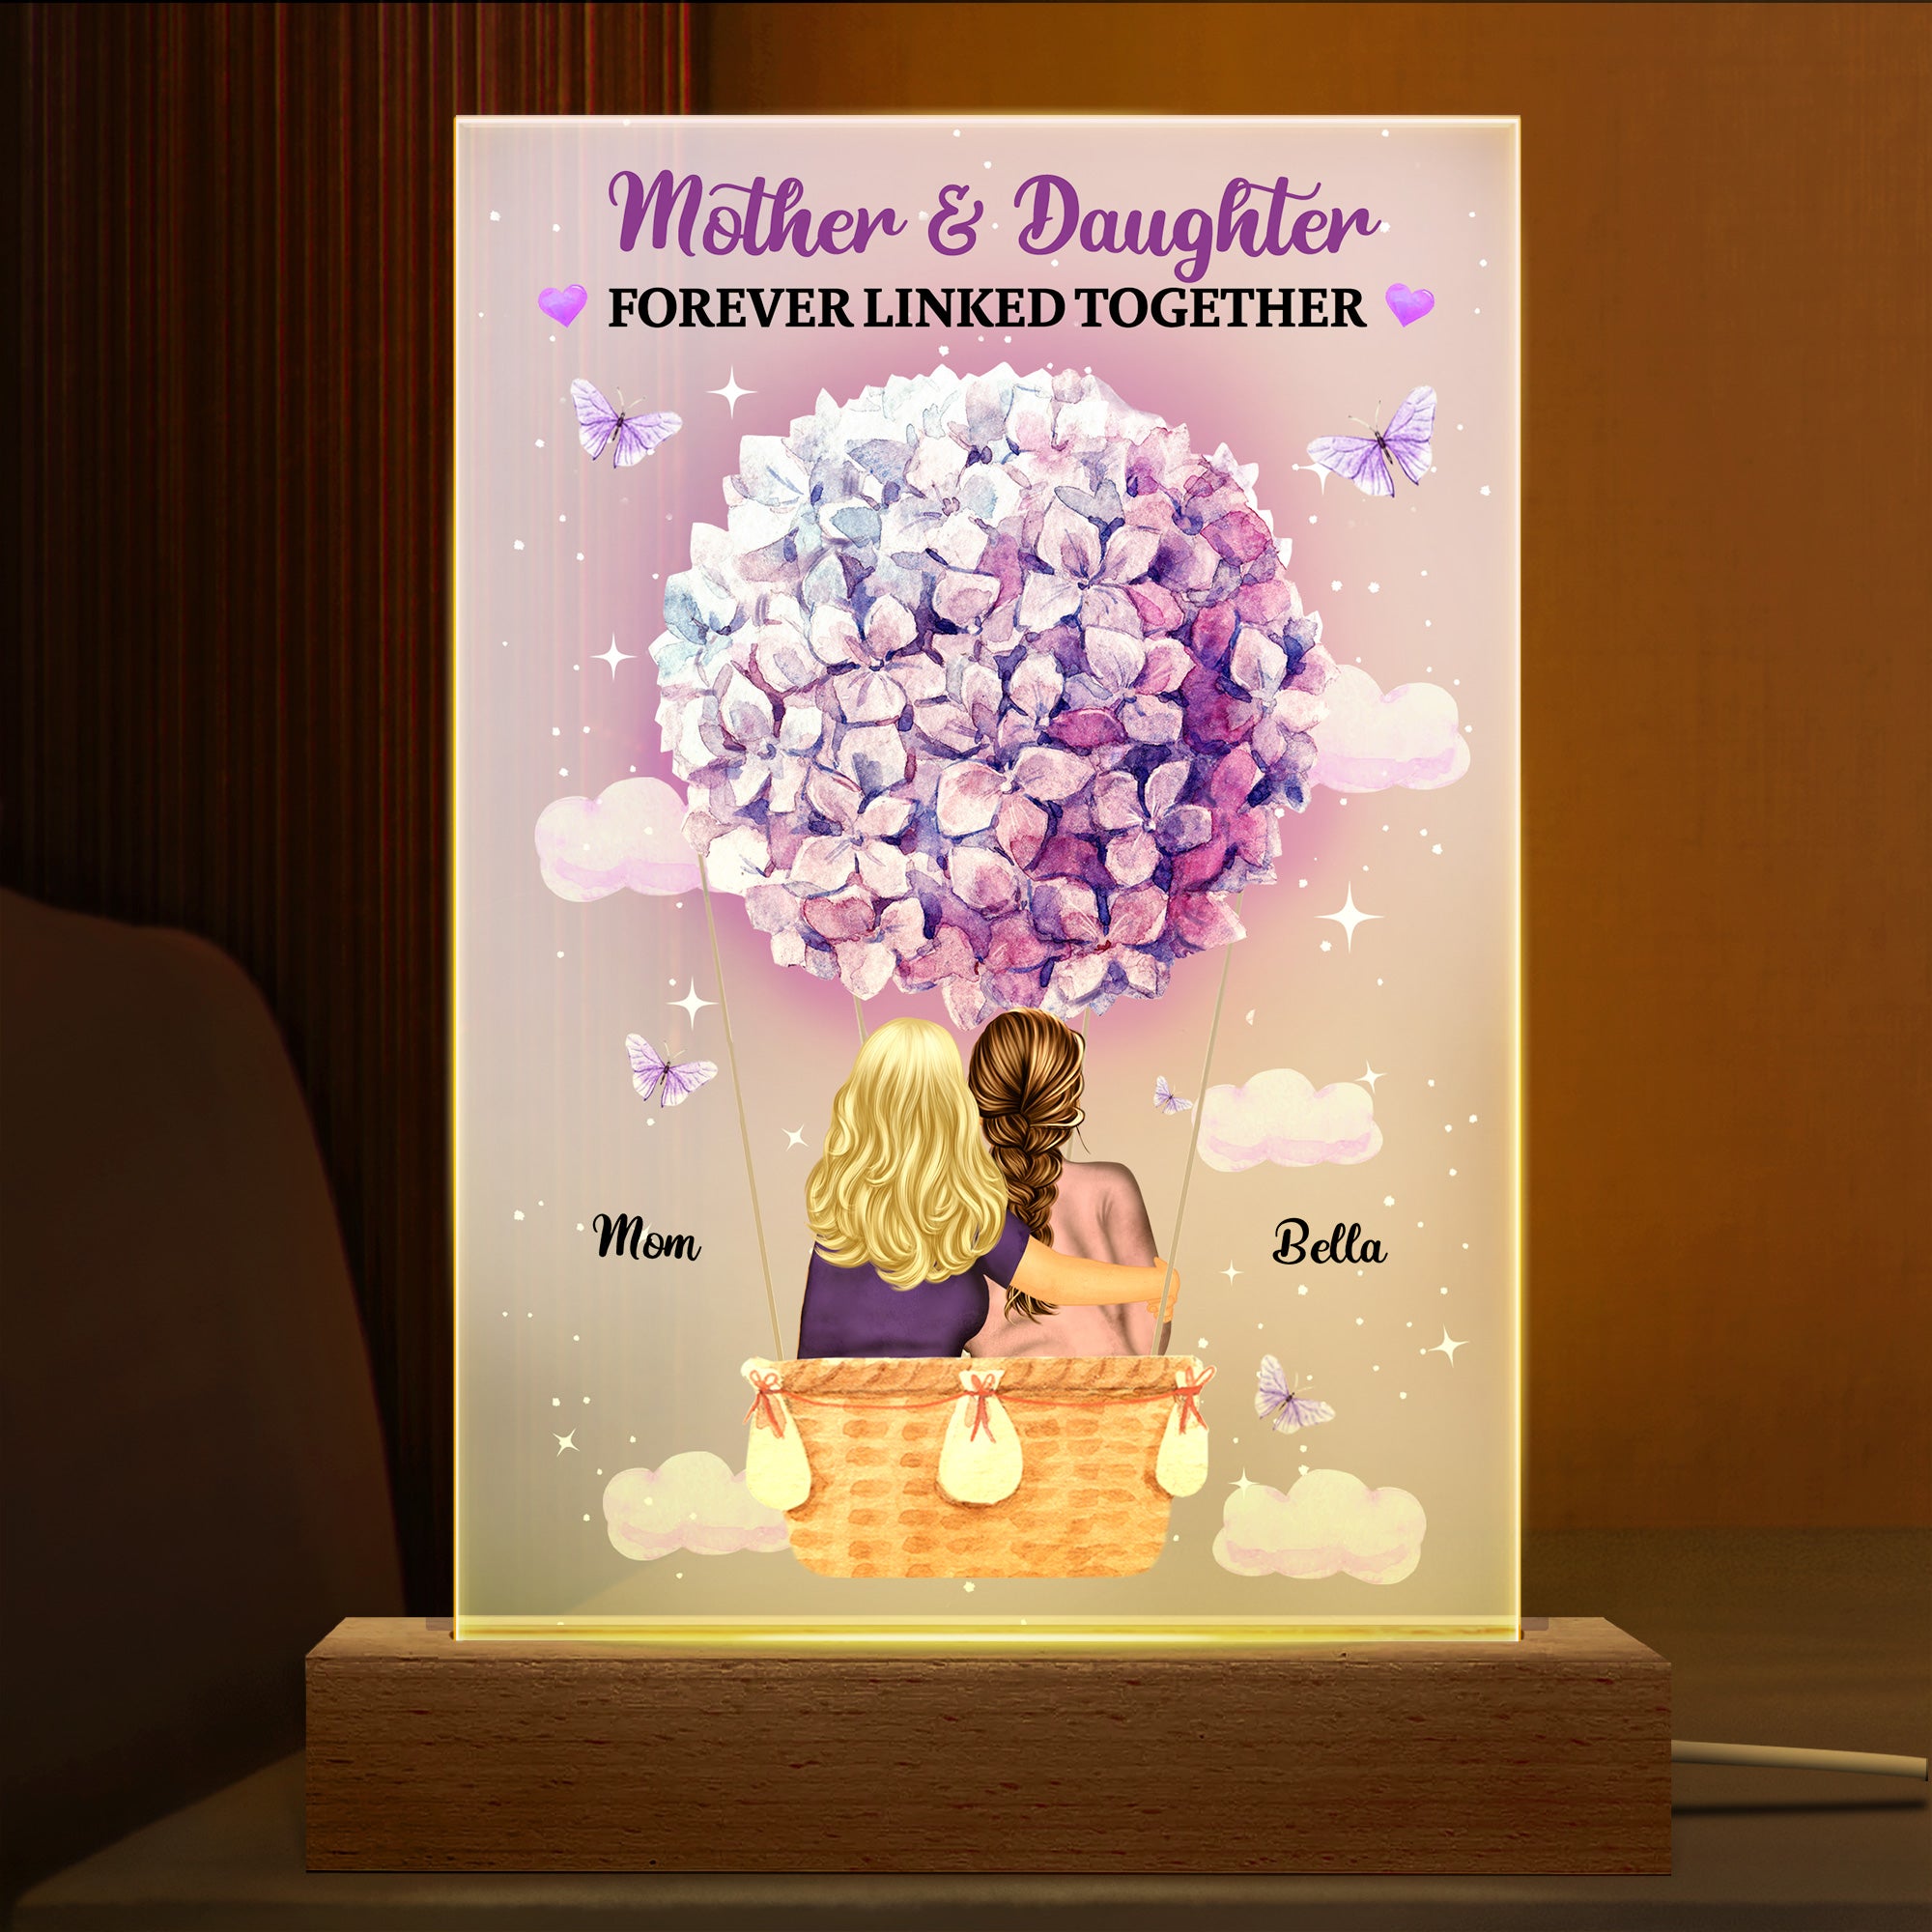 The Love Between A Mother And A Daughter Is Forever Watercolor Style - Birthday, Loving Gift For Mom, Grandma, Grandmother, Granddaughter - Personalized Custom 3D Led Light Wooden Base